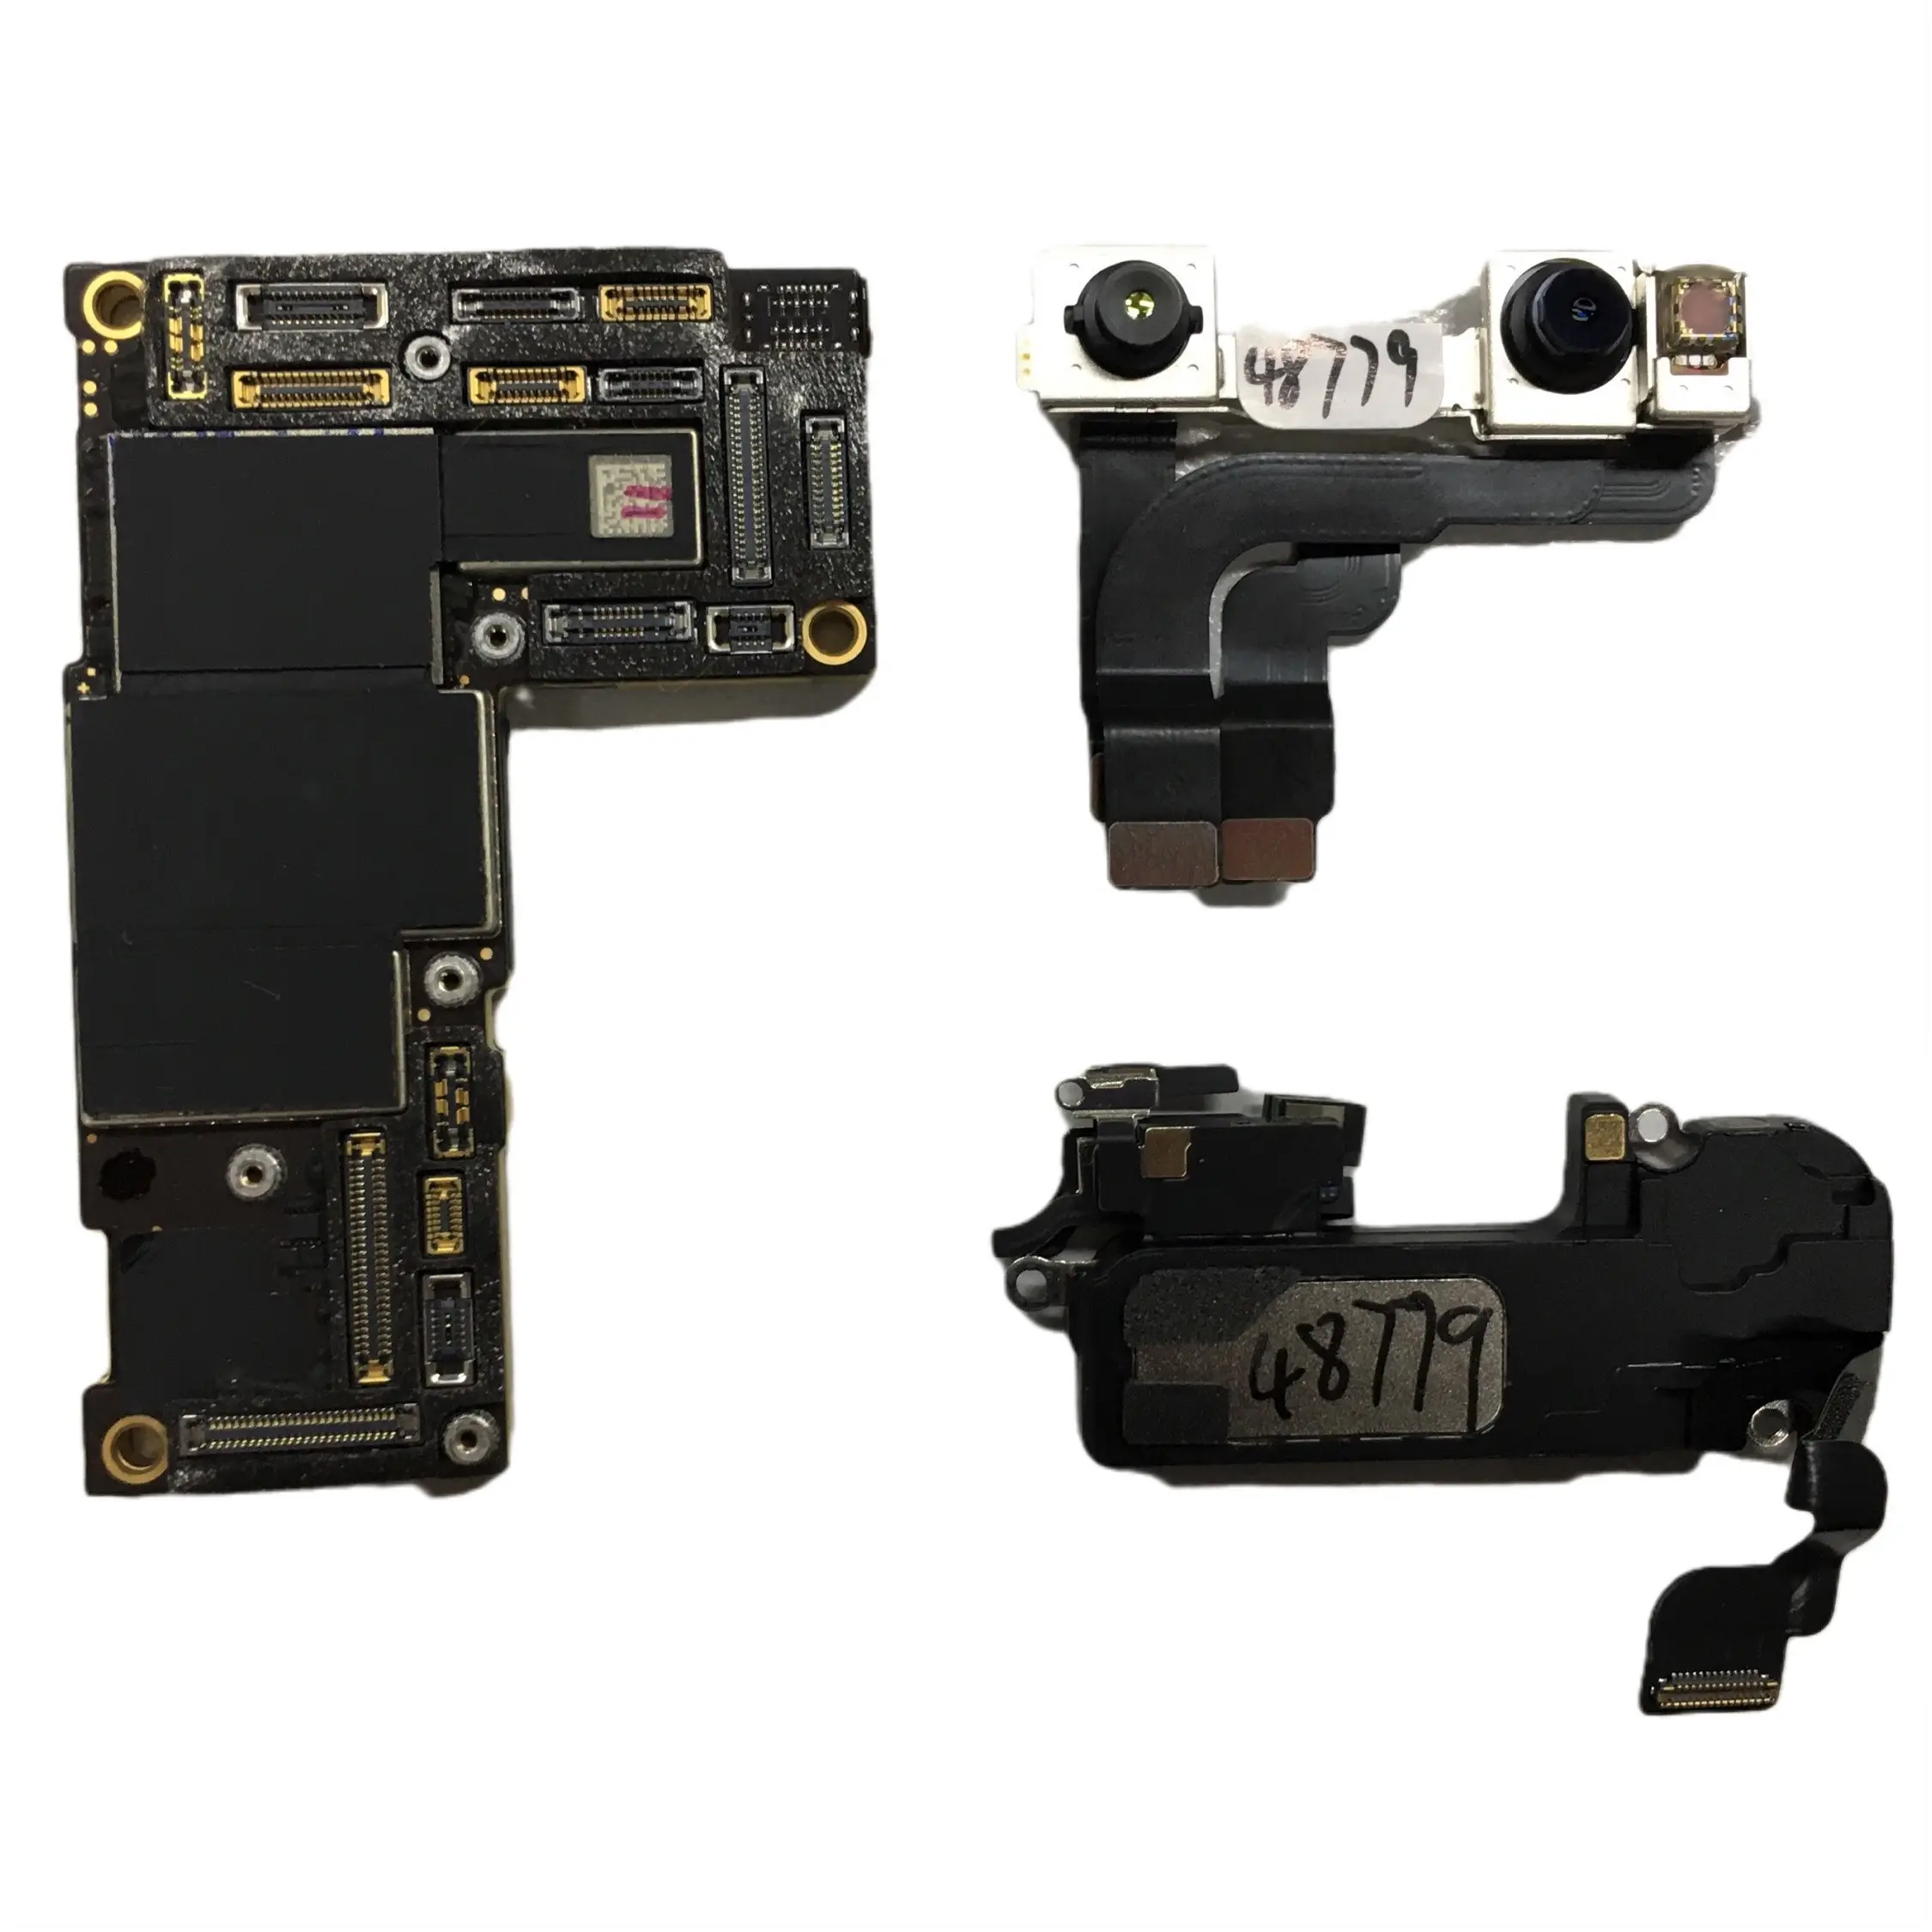 Original unlocked 13 motherboard For iphone 13 pro max 256GB logic board with Face ID 13pro max motherboard